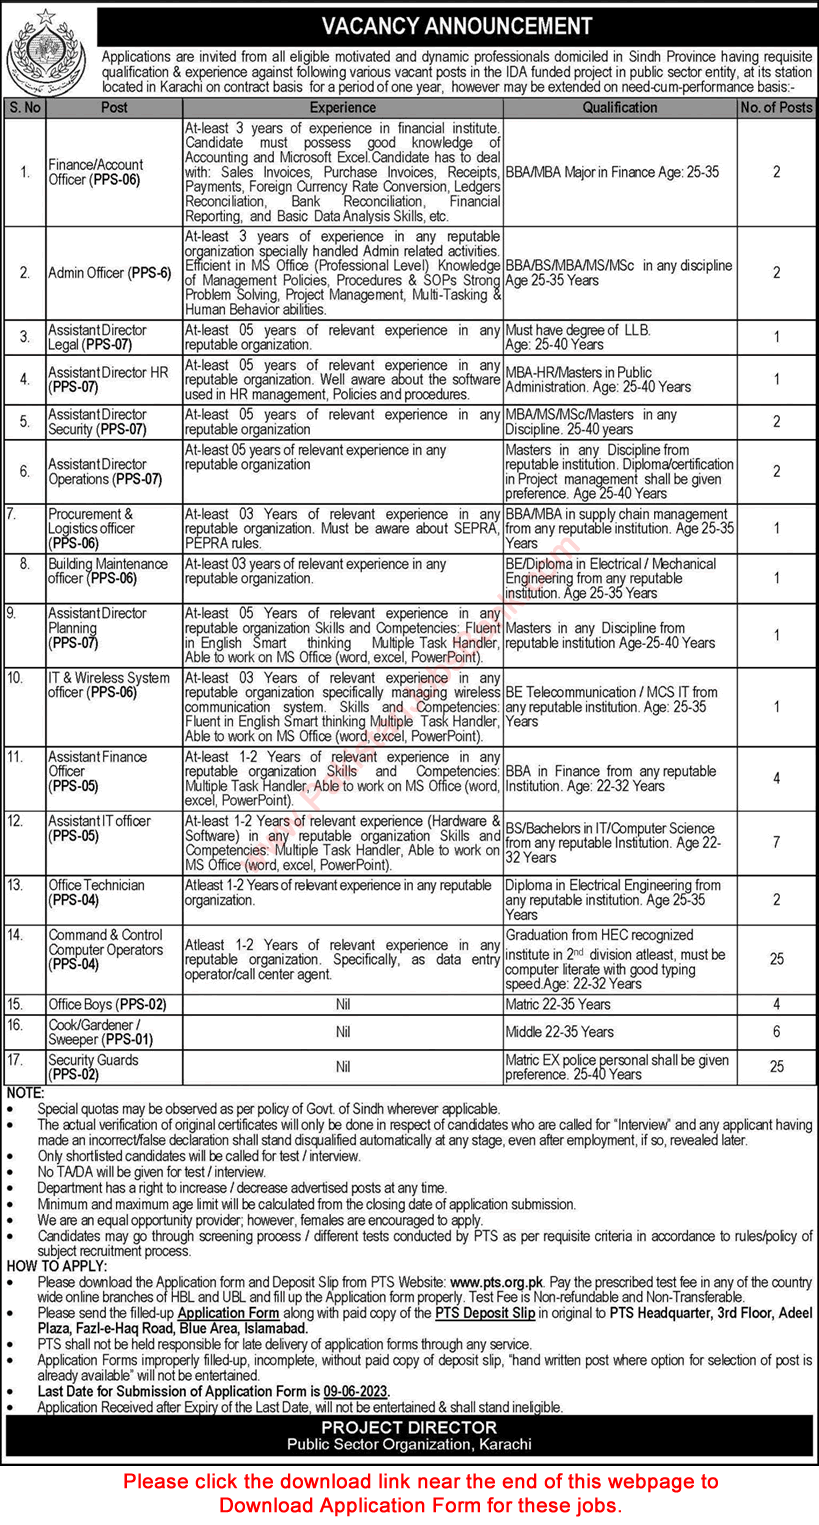 Public Sector Organization Karachi Jobs 2023 May / June PTS Application Form Computer Operators, Security Guards & Others Latest